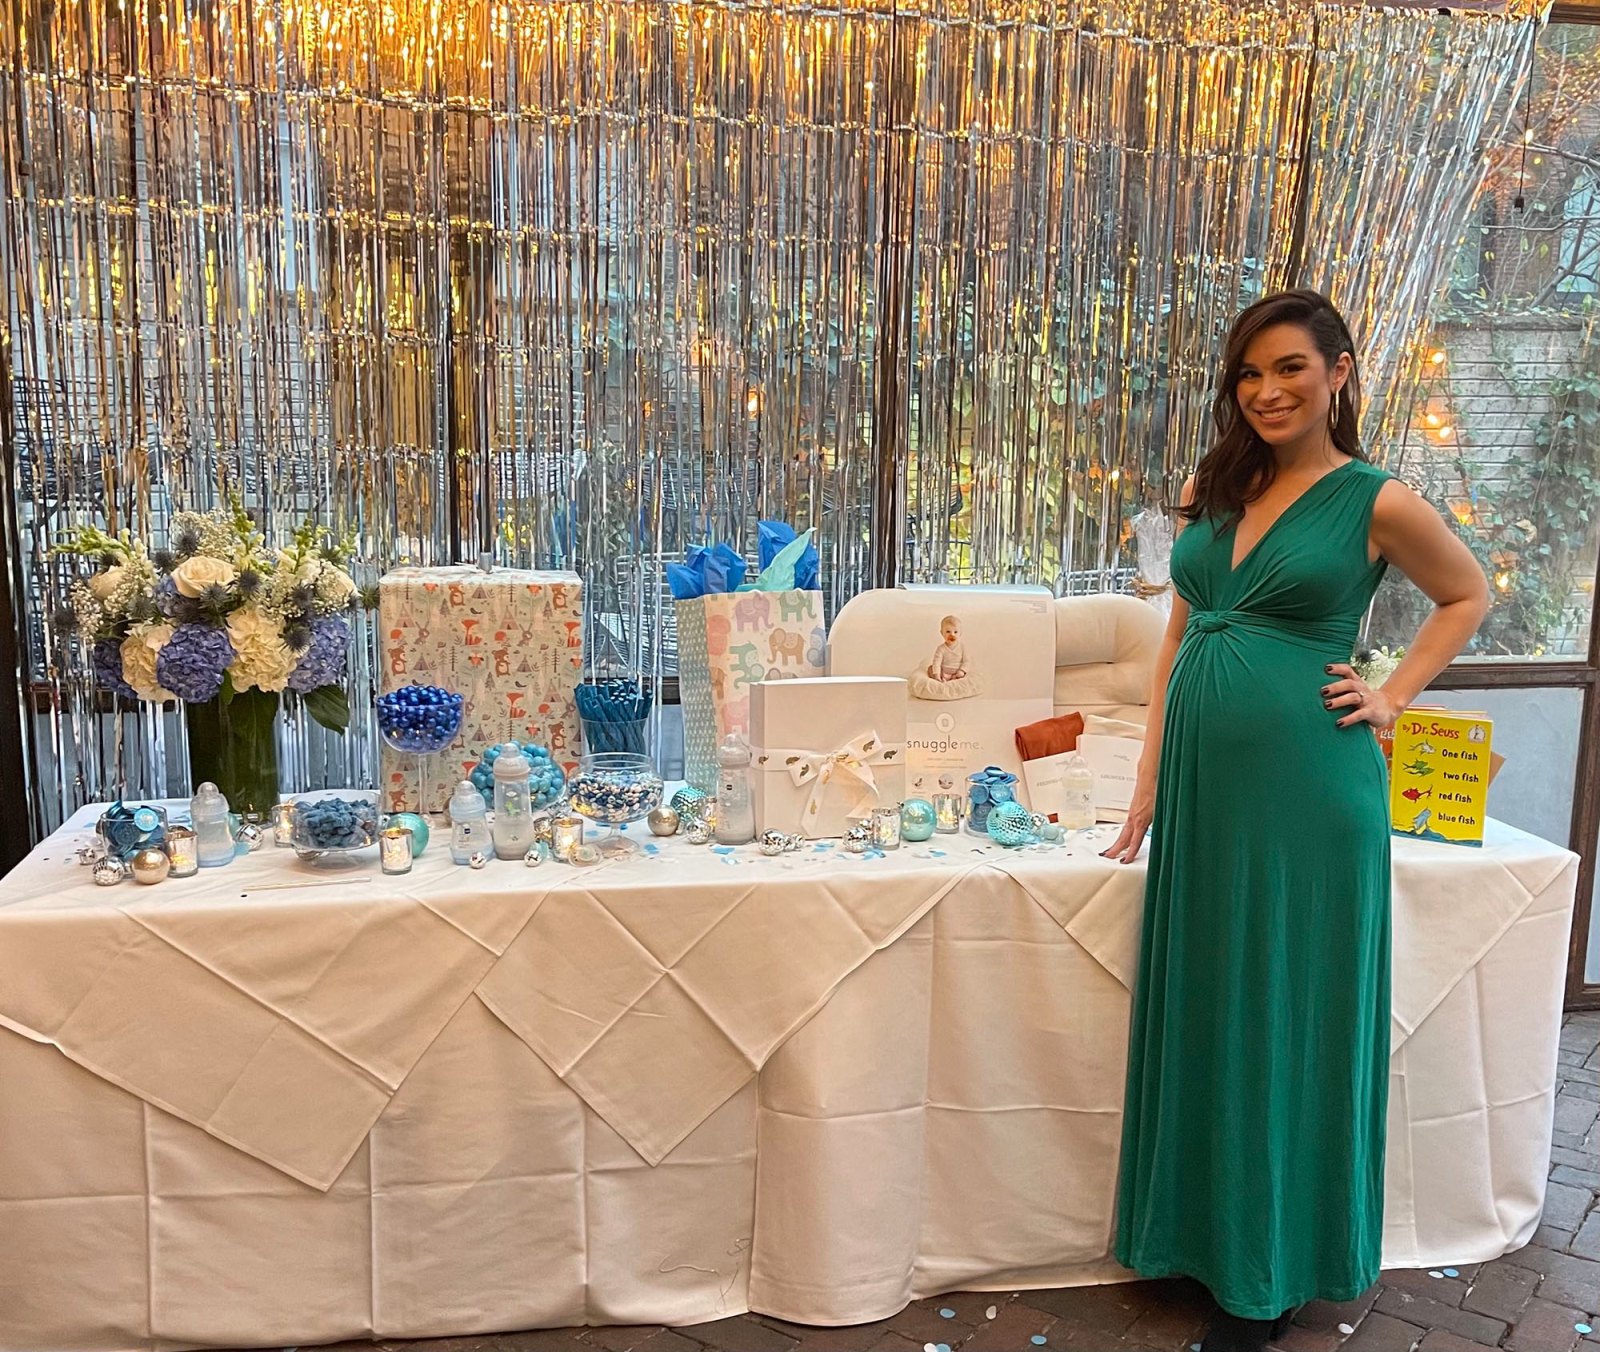 Ashley I. from The Bachelor at her baby shower